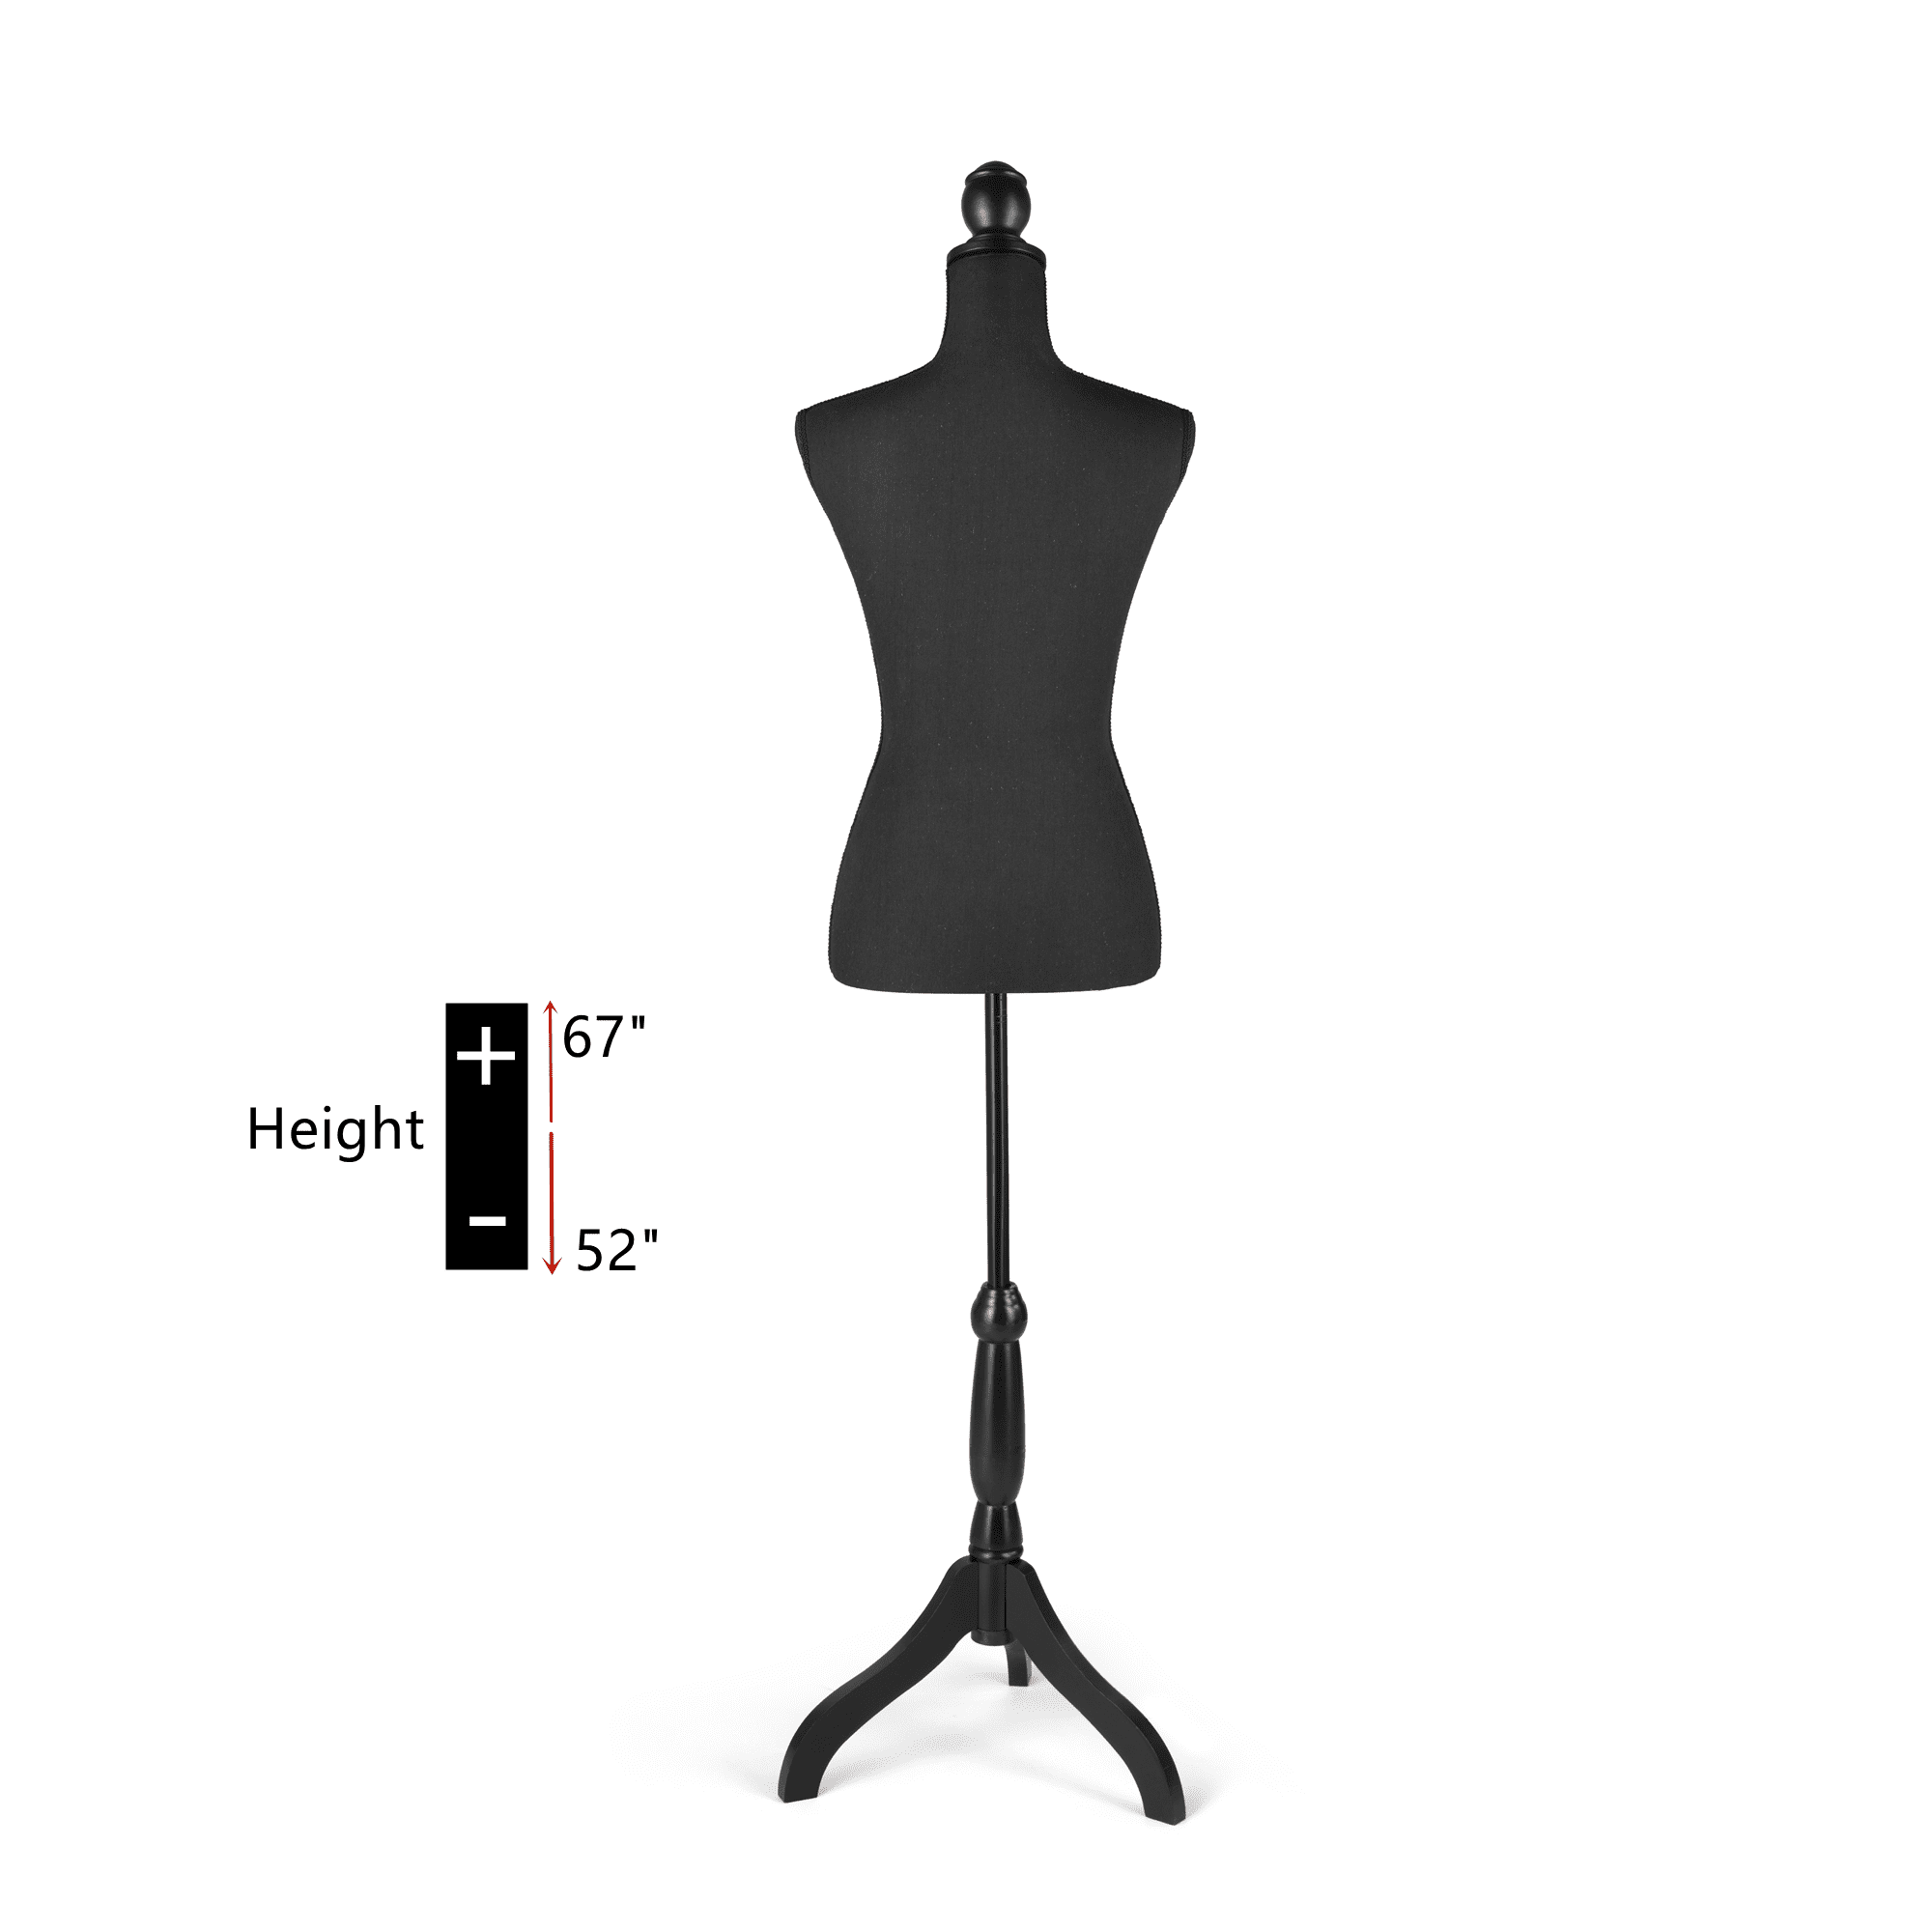 ZAQYCM Black Mannequin Female, Sewing Manikin Body Stand Adjustable with  Wheels Base, Foam Dress Form Maniquins Body Clothing Mannequin Torso (Color  